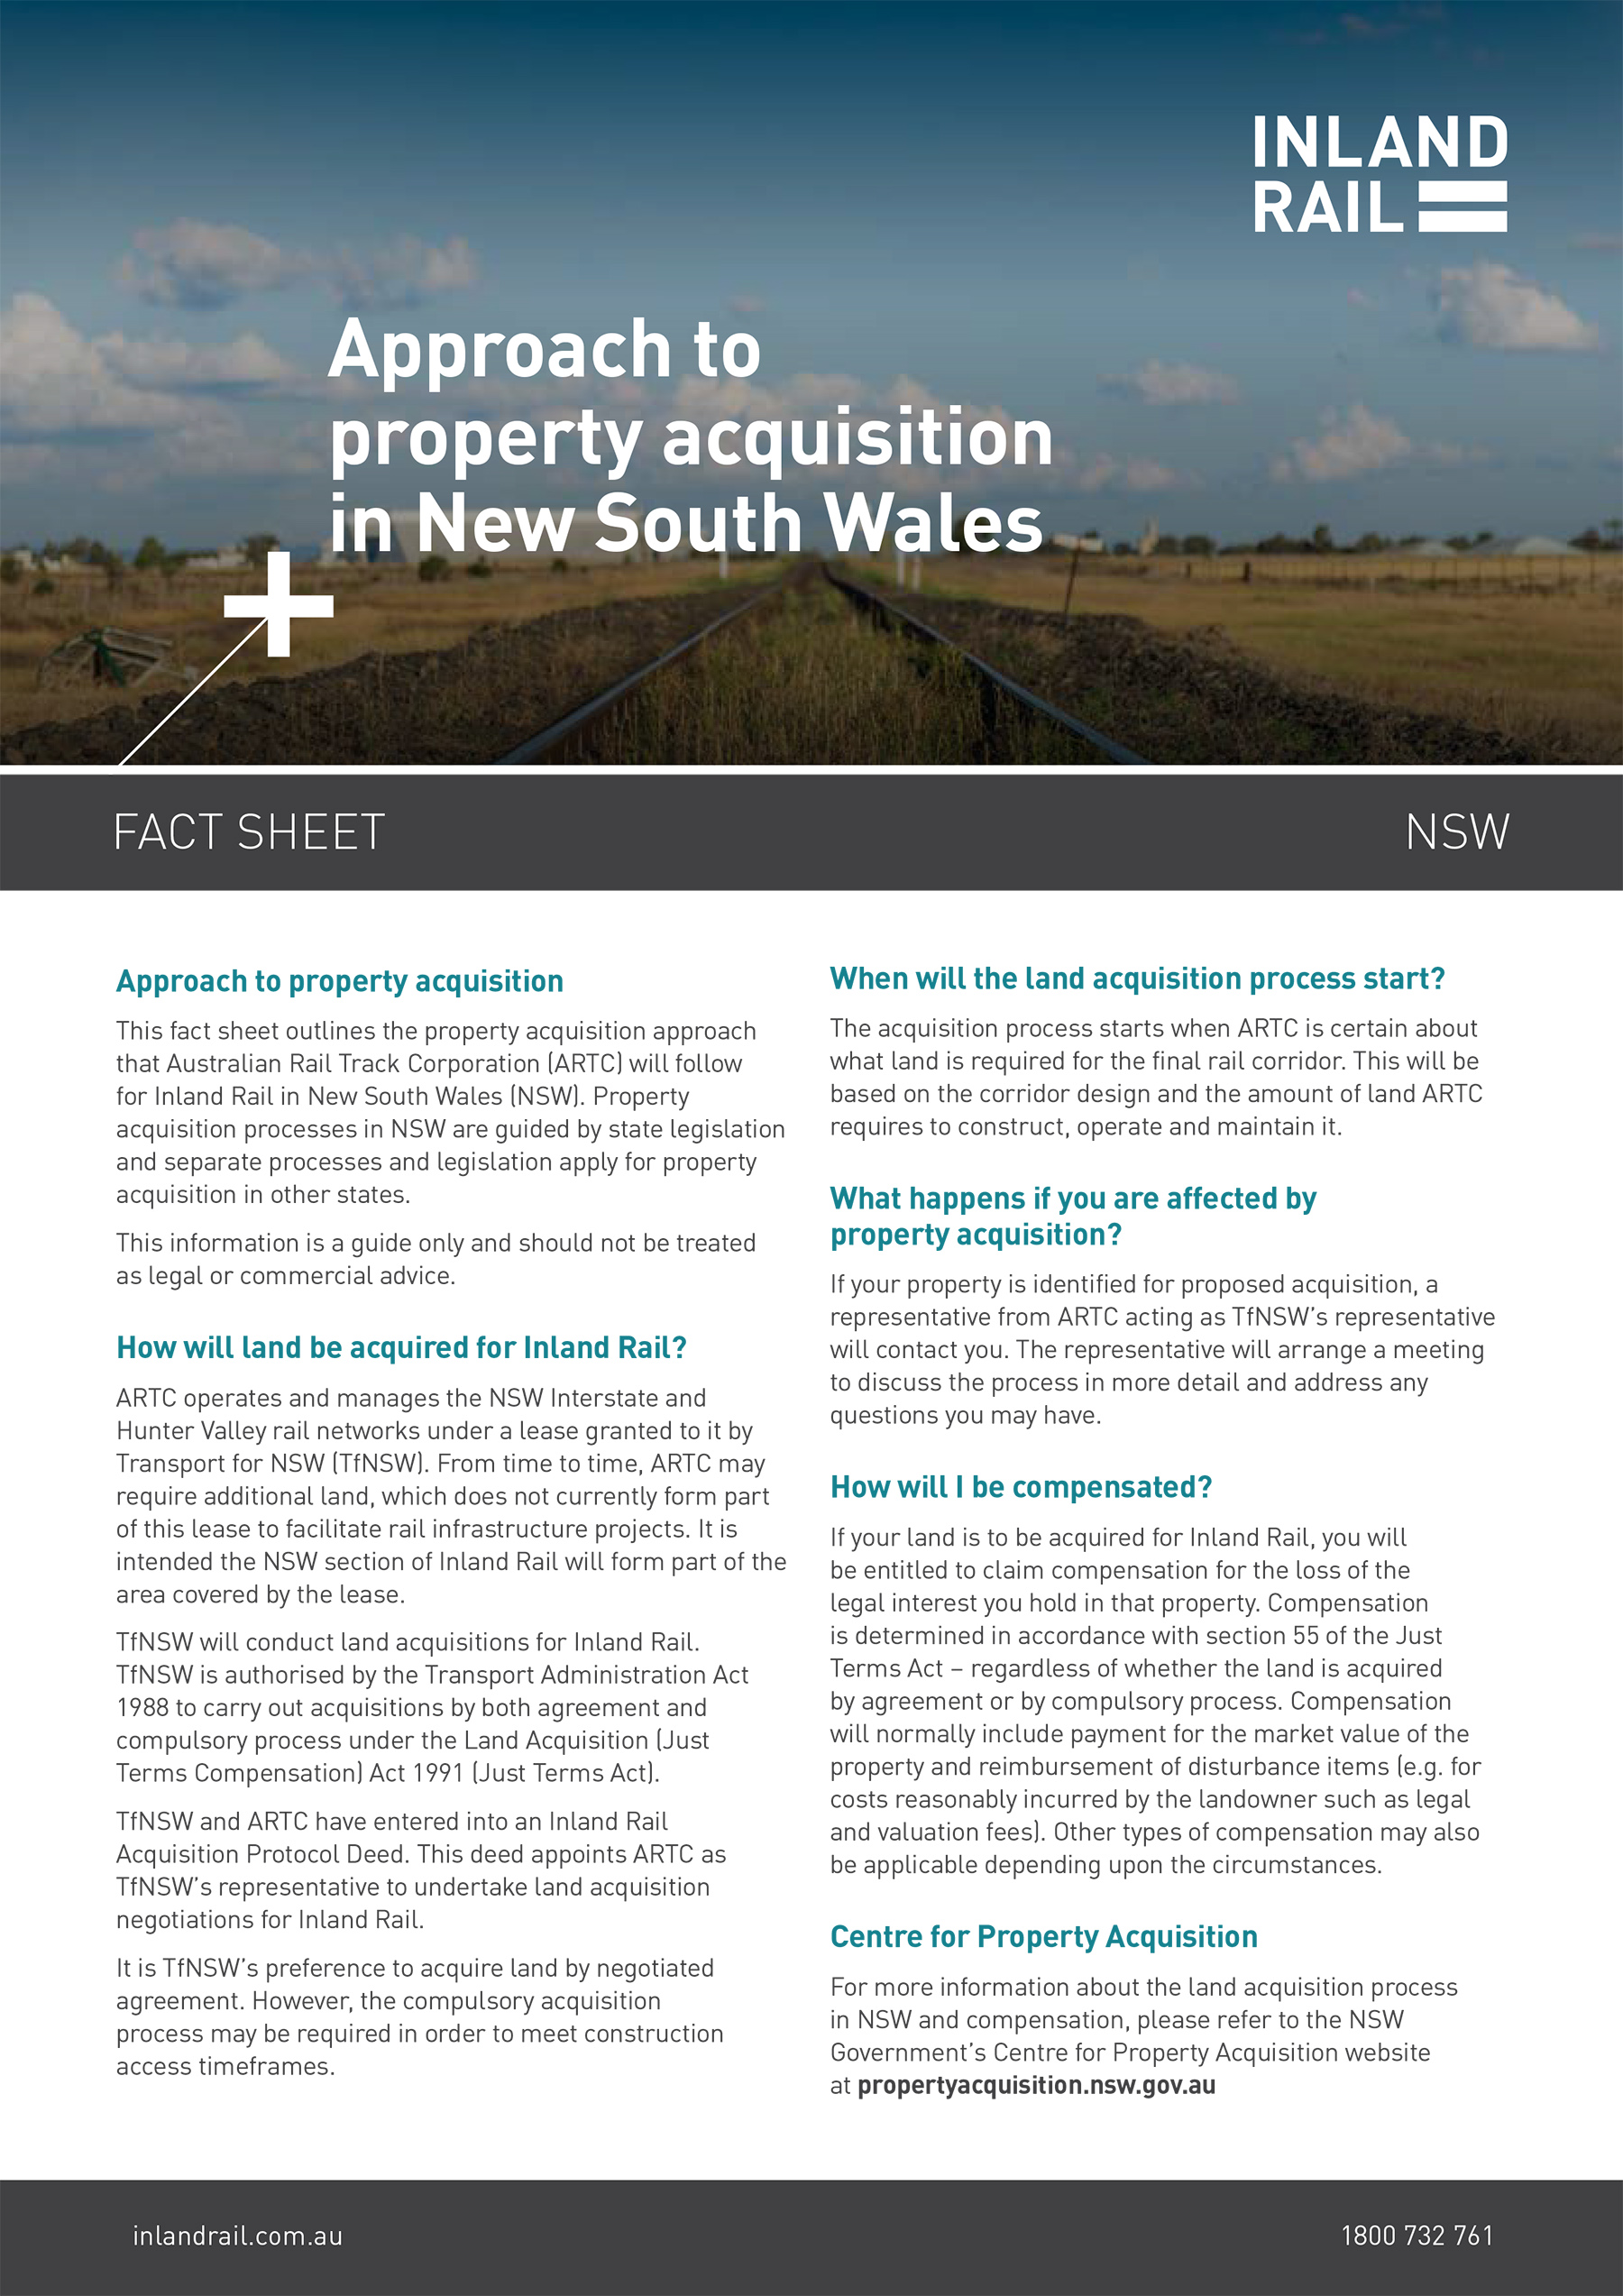 Approach to property acquistion in NSW